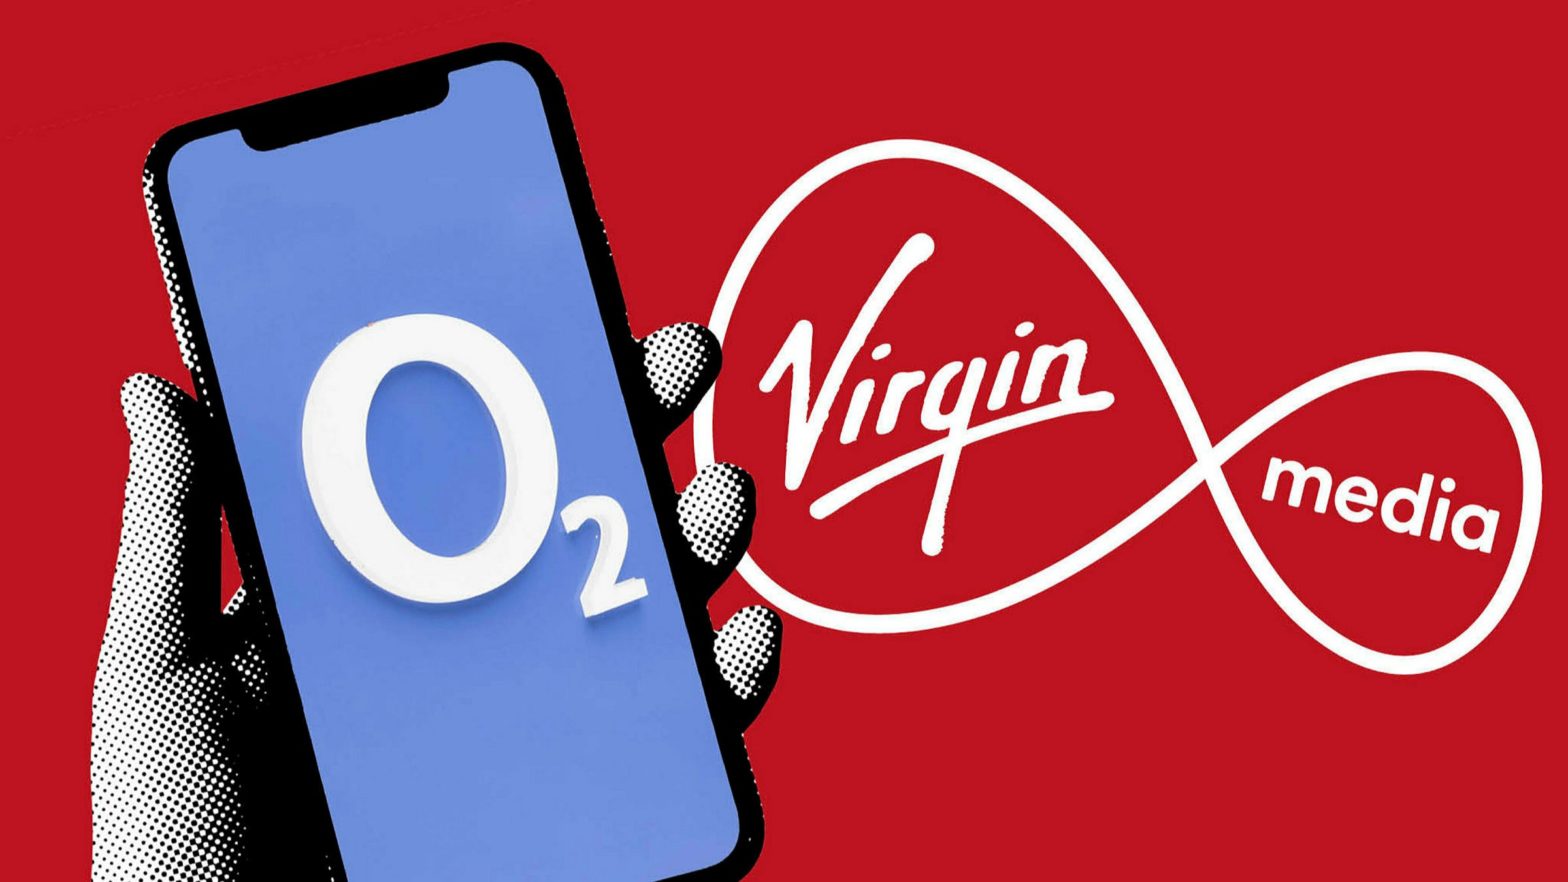 Financial Times o2 and Virgin Media graphic